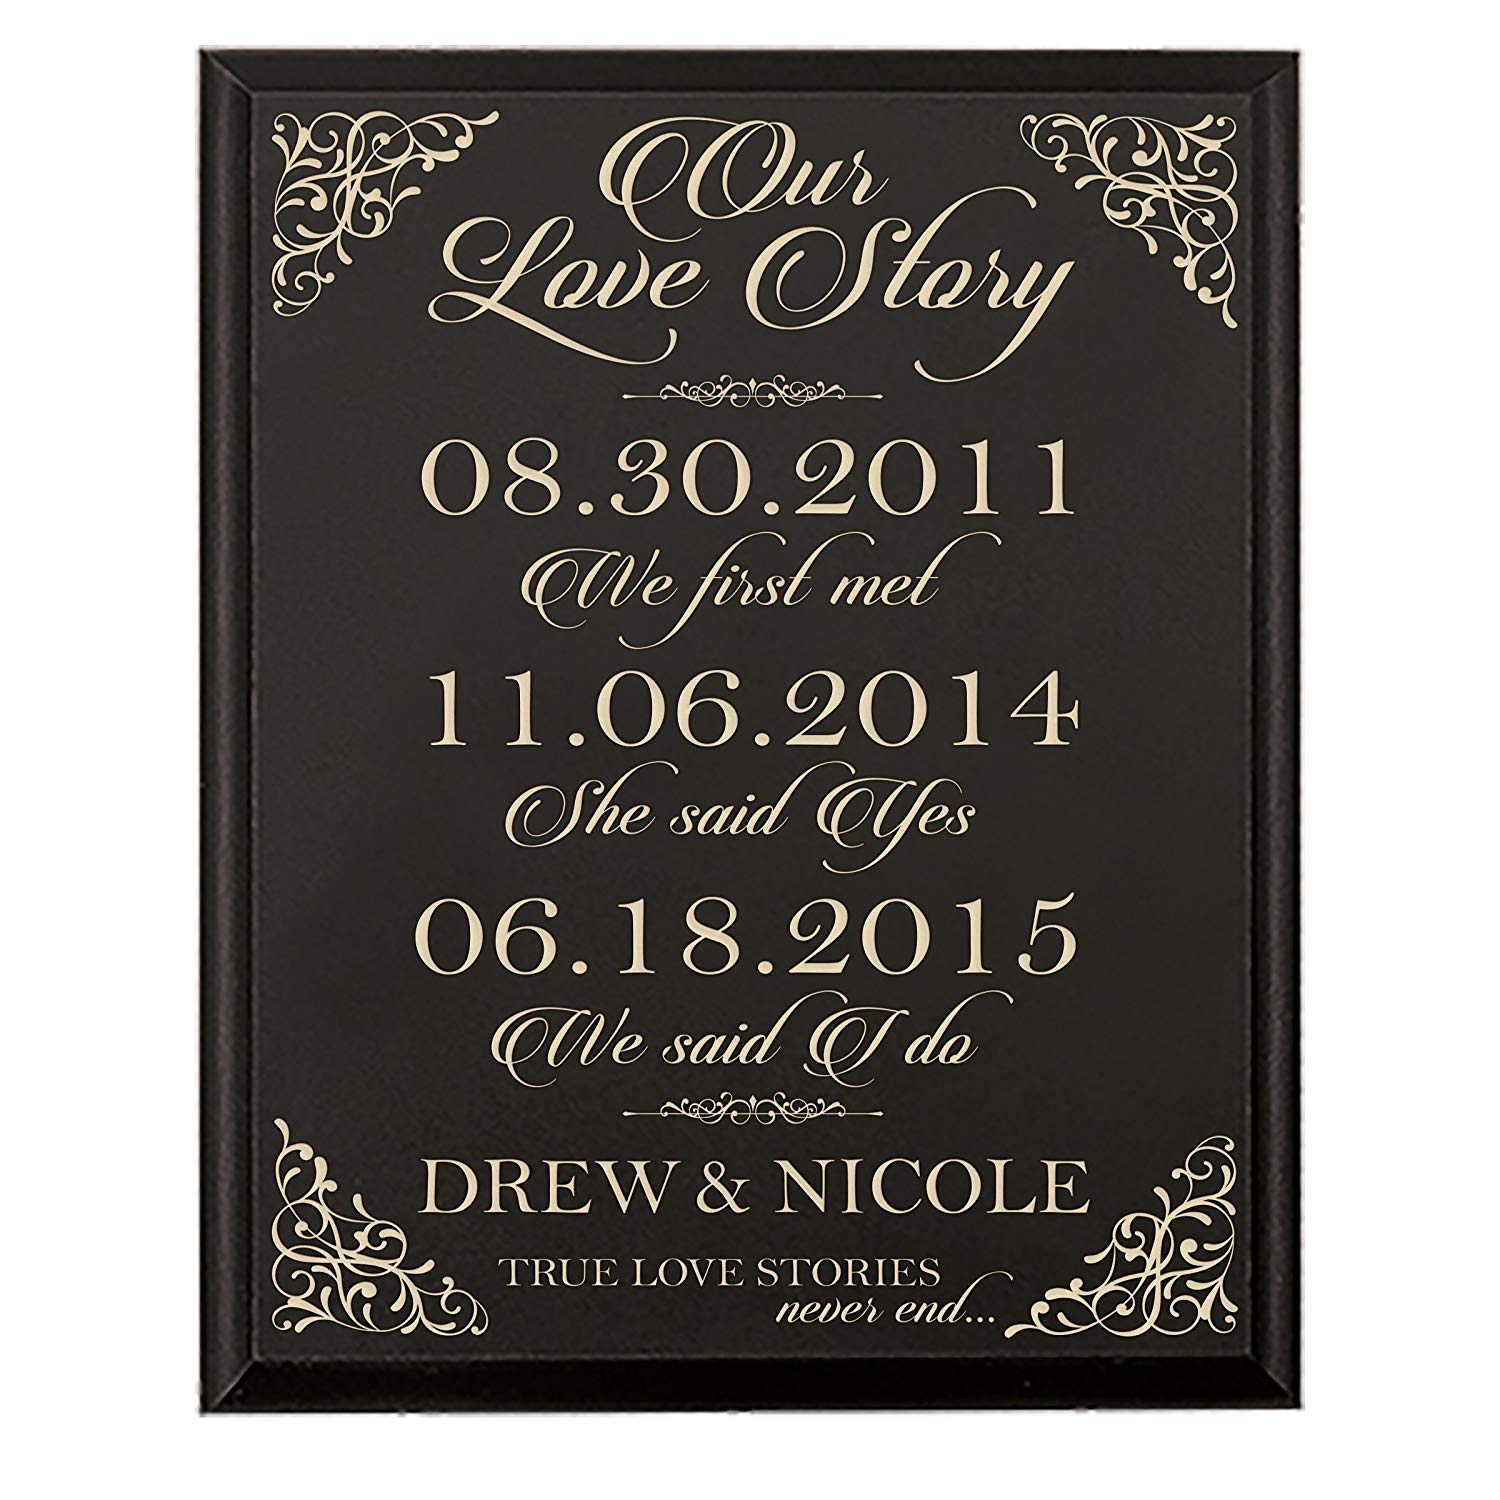 Personalized Wedding Anniversary Wall Plaque - Our Love Story - LifeSong Milestones